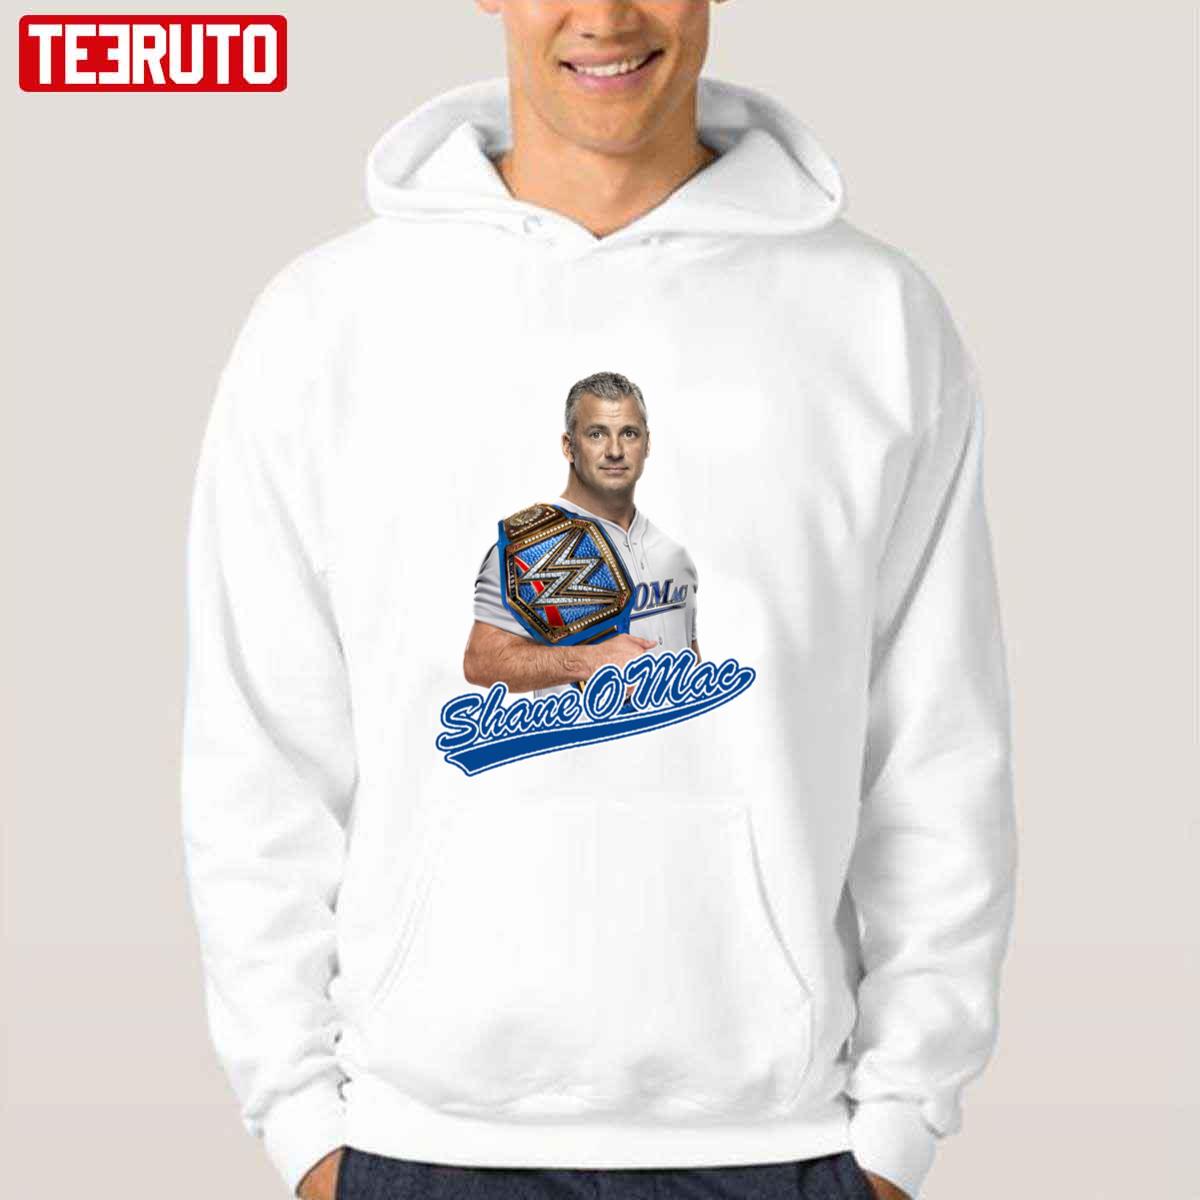 We’ll Find Their Place In Line Shane McMahon Unisex Hoodie